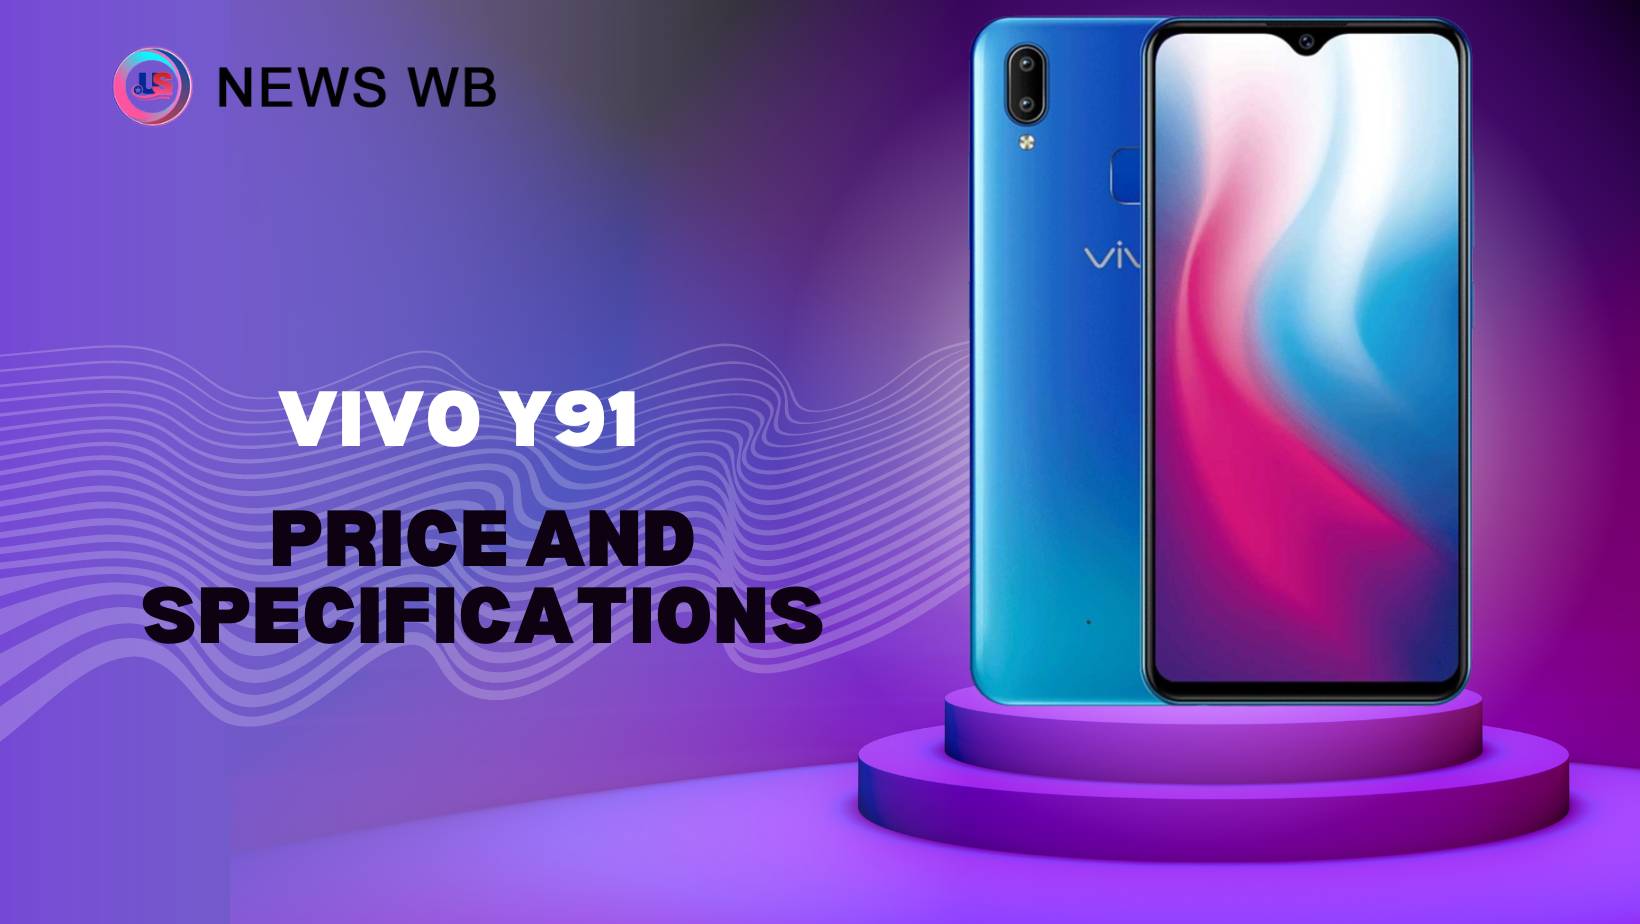 Vivo Y91 Price and Specifications